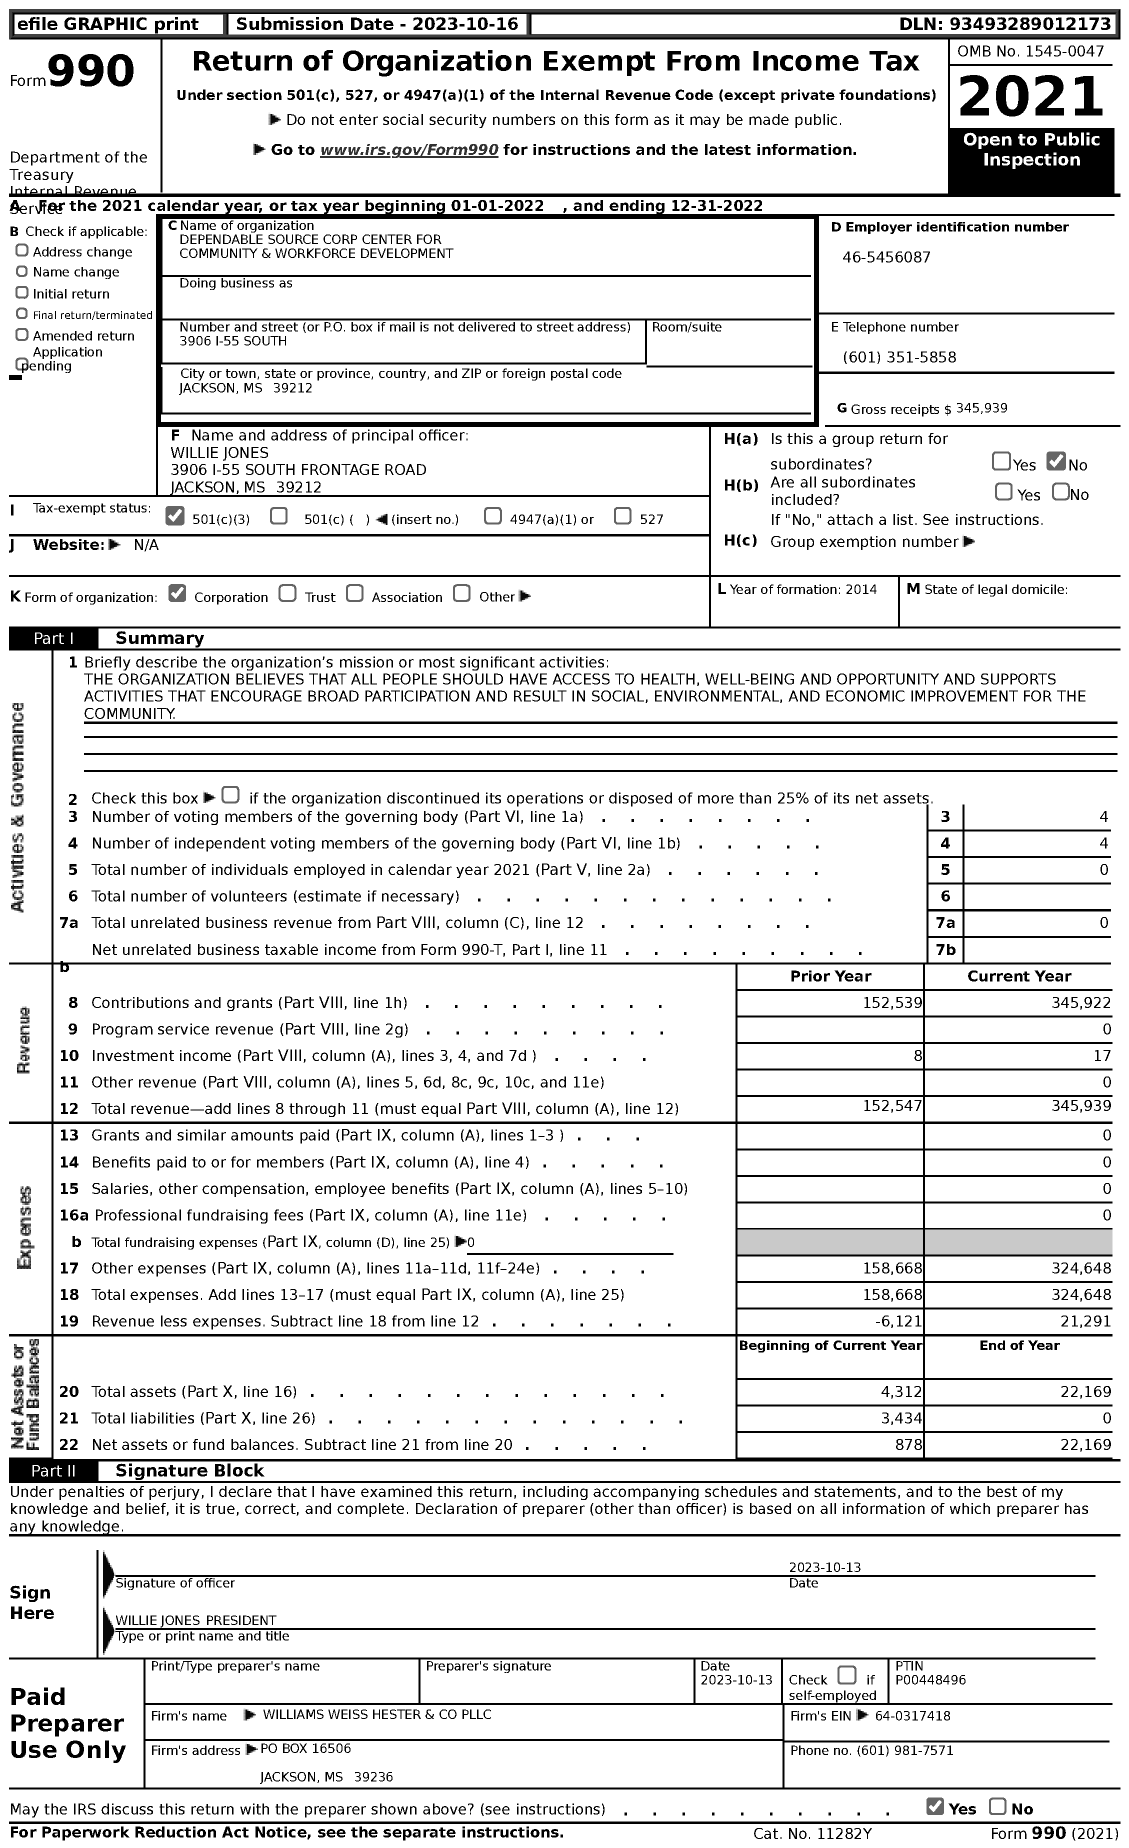 Image of first page of 2022 Form 990 for Dependable Source Corp Center for Community and Workforce Development